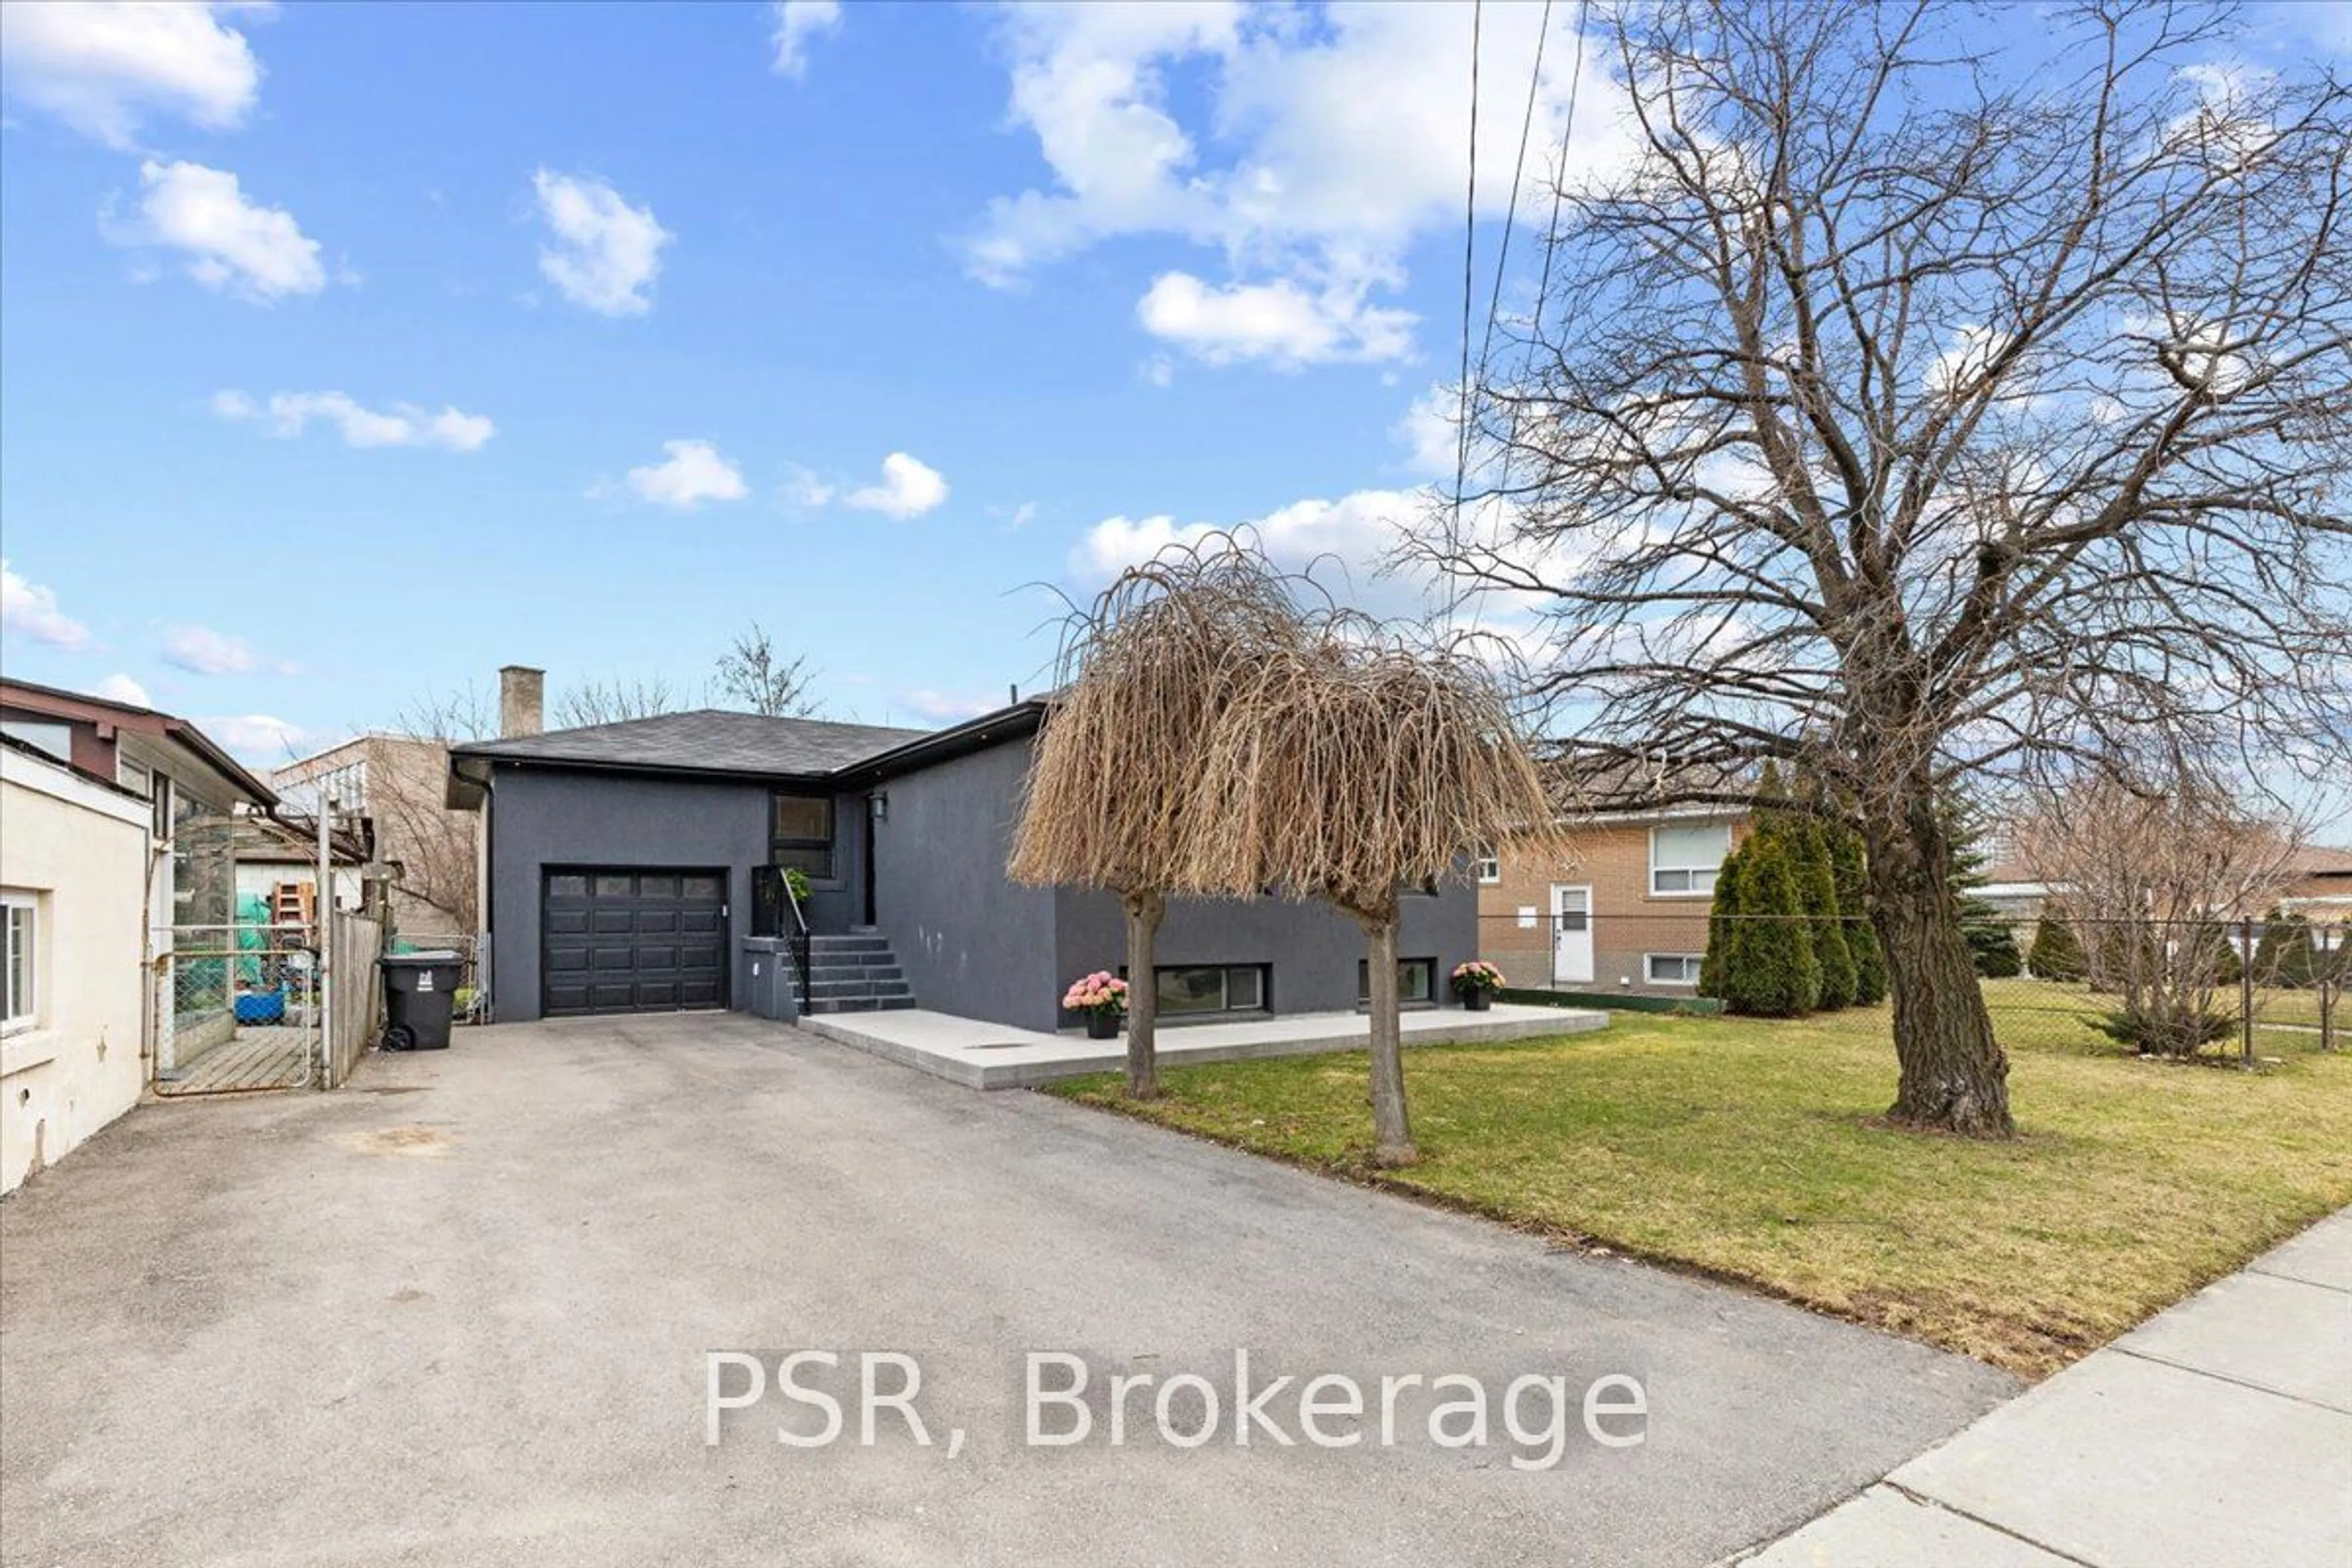 Frontside or backside of a home for 289 Waterloo Ave, Toronto Ontario M3H 3Z8